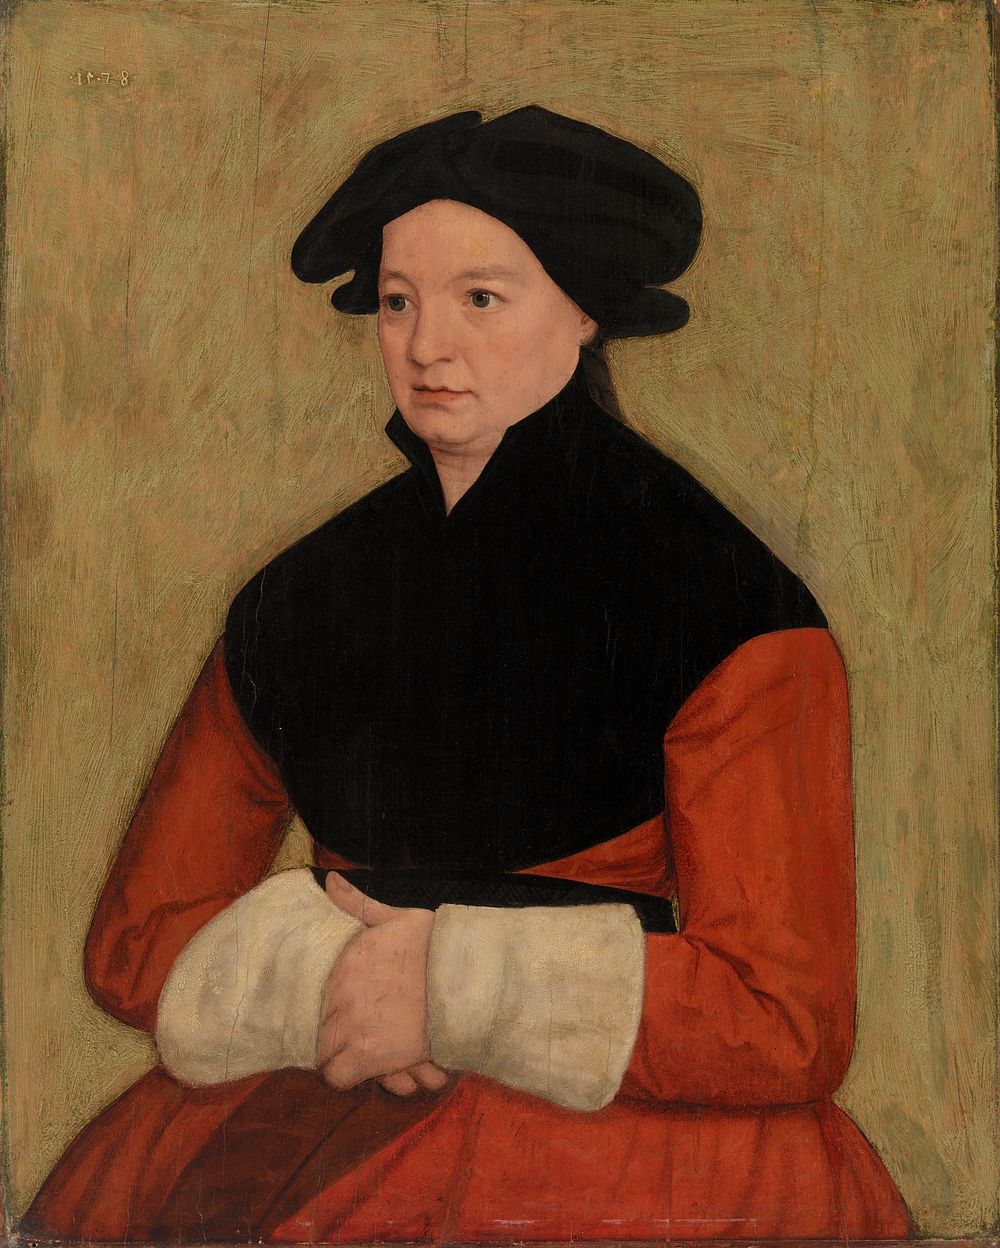 Portrait of a Woman by South German Master